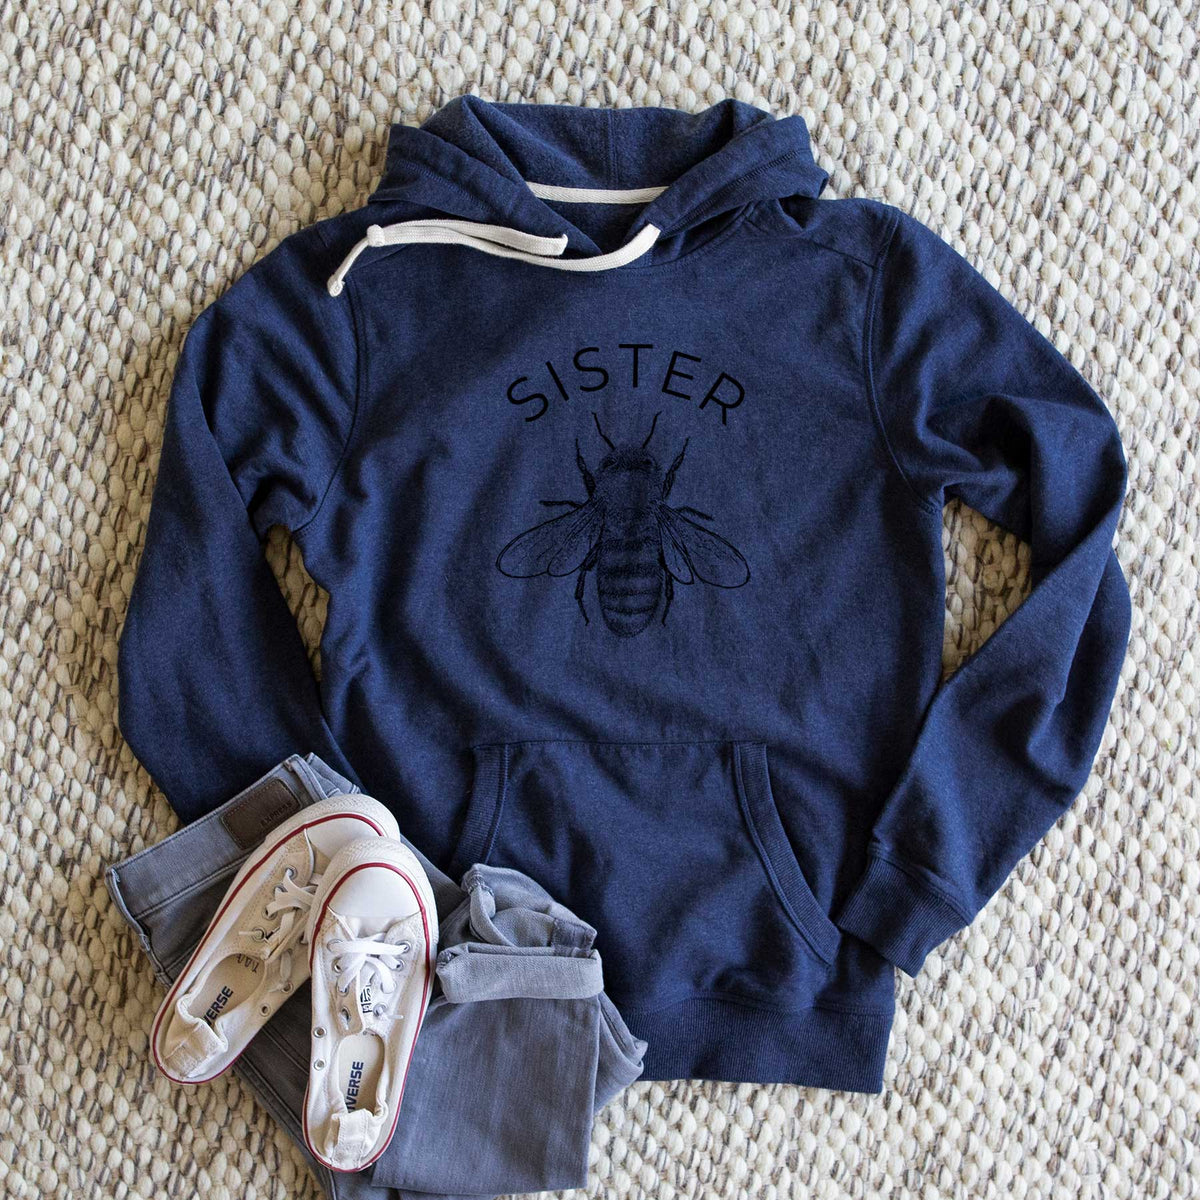 Sister Bee - Unisex Recycled Hoodie - CLOSEOUT - FINAL SALE